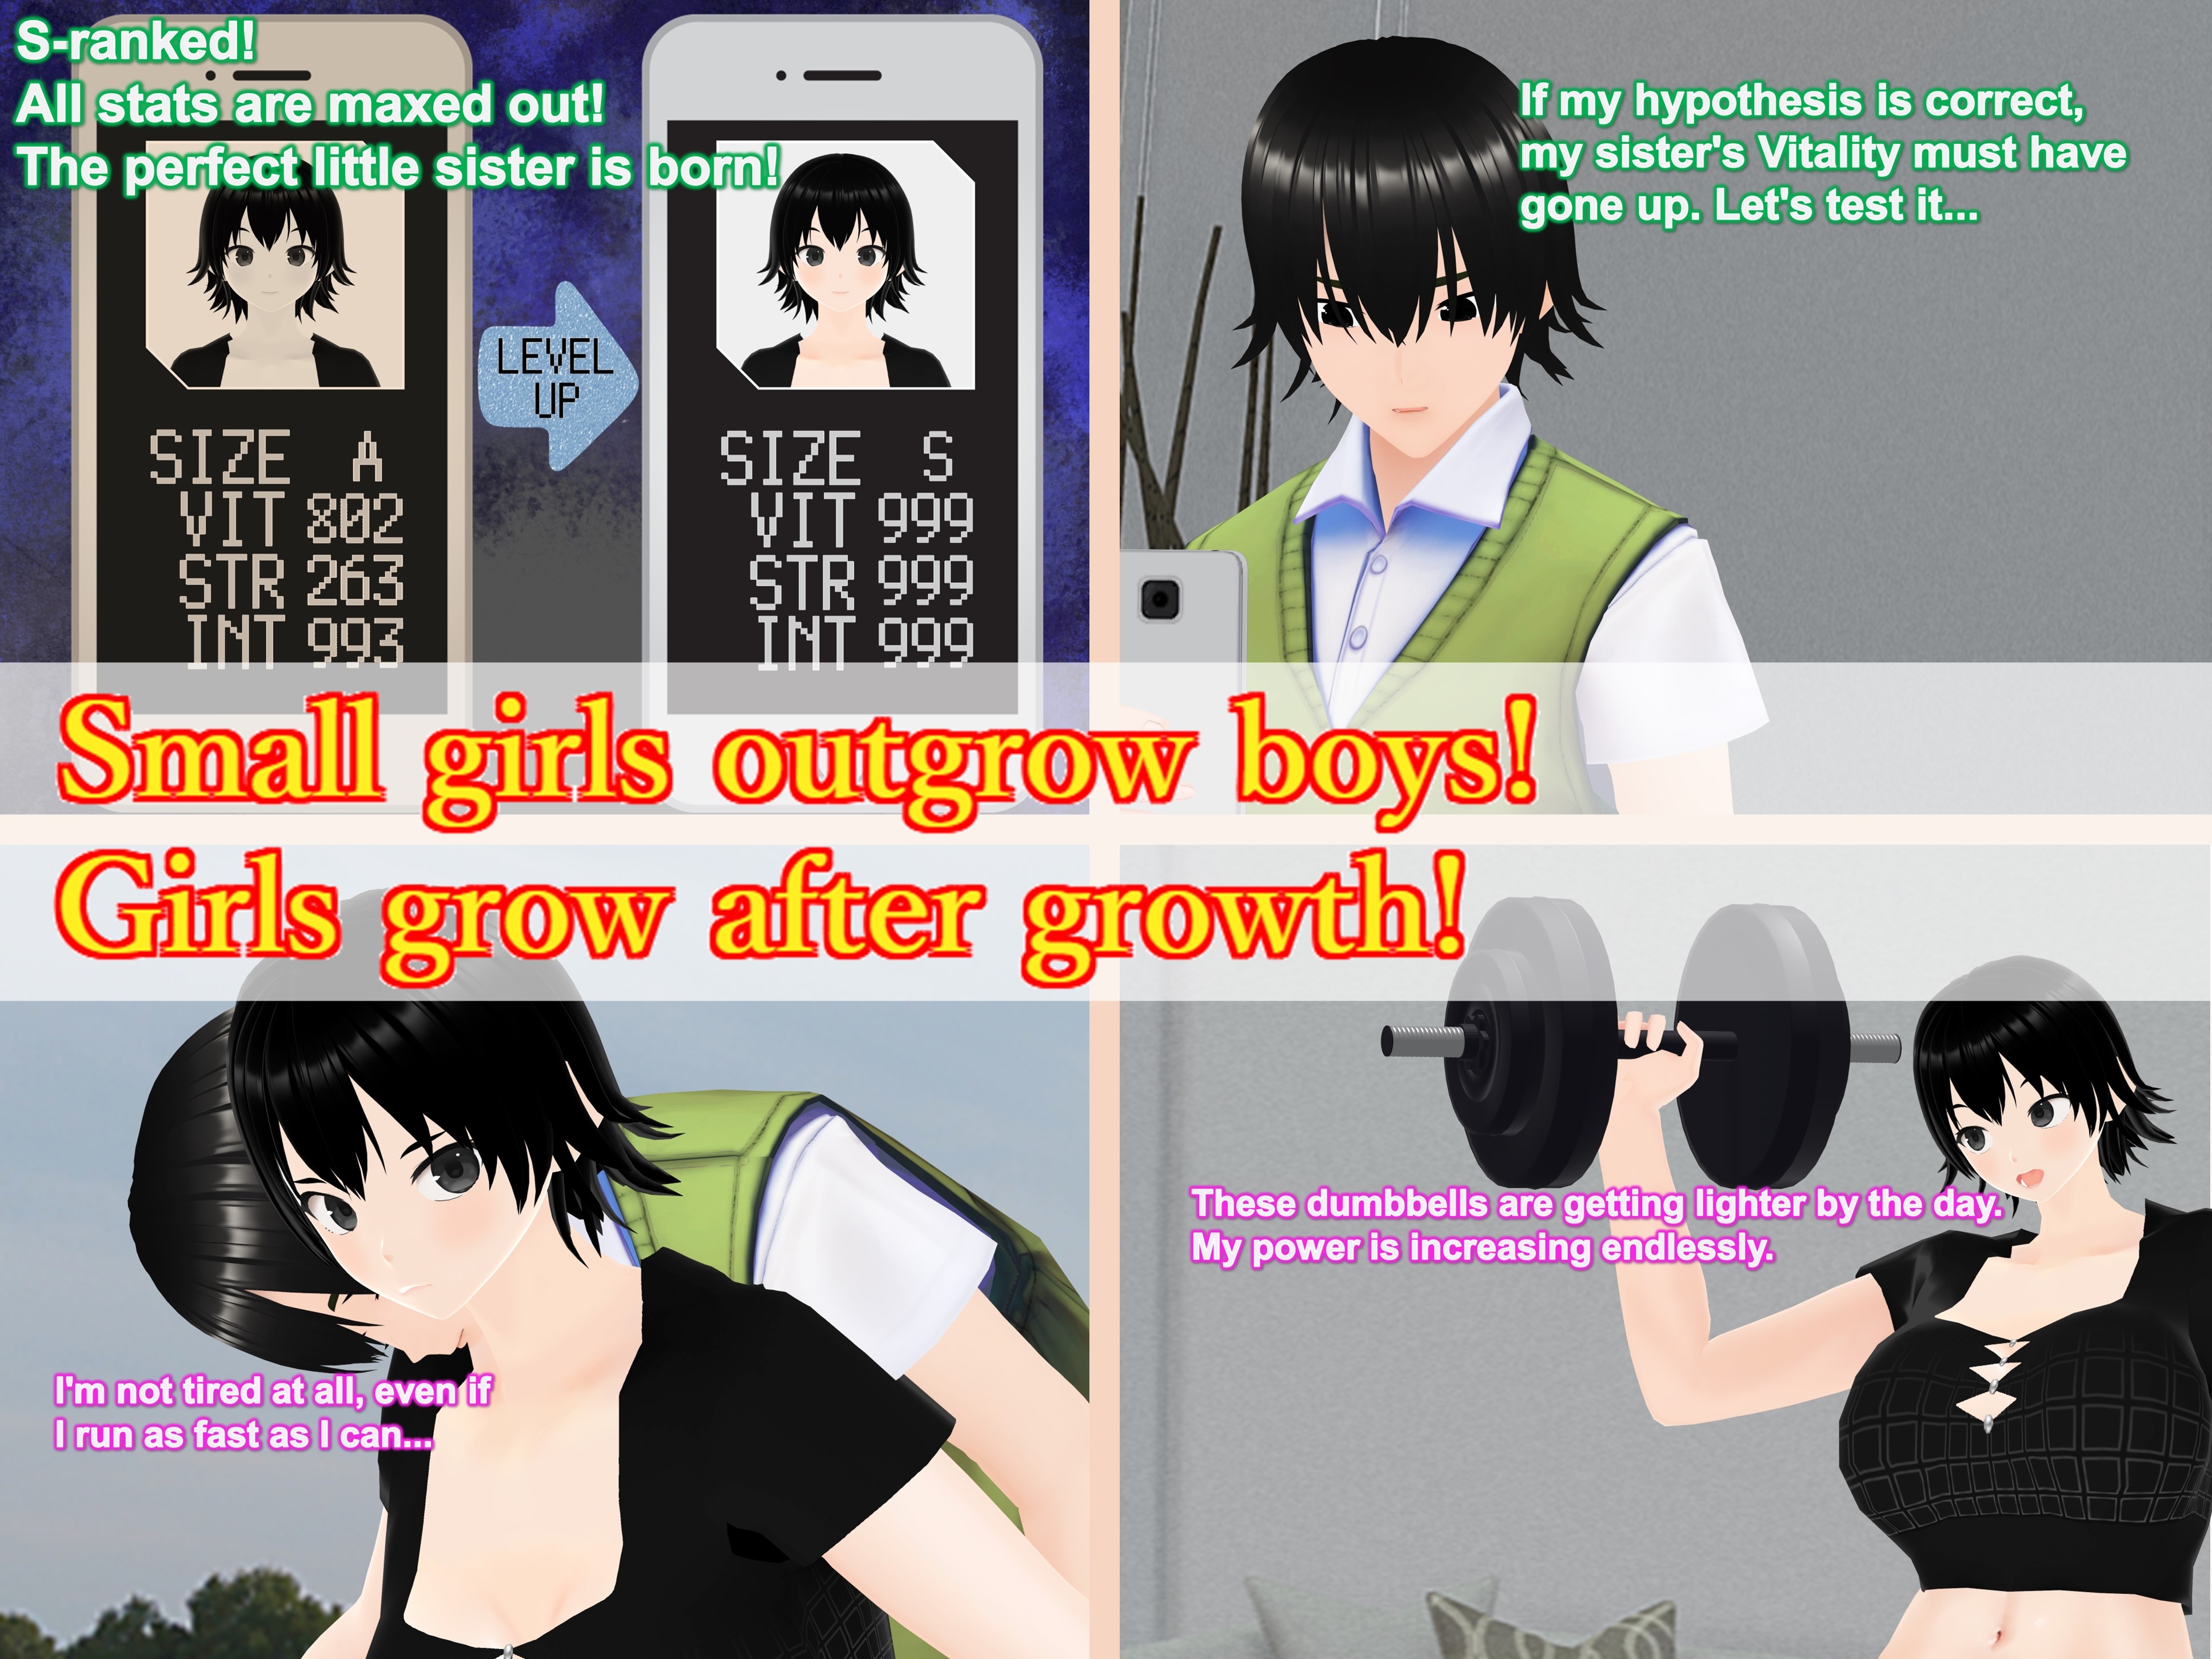 Outgrowing only girls, Overtake boys, Growth sound. Stat building game App Arc [女子成長クラブ]